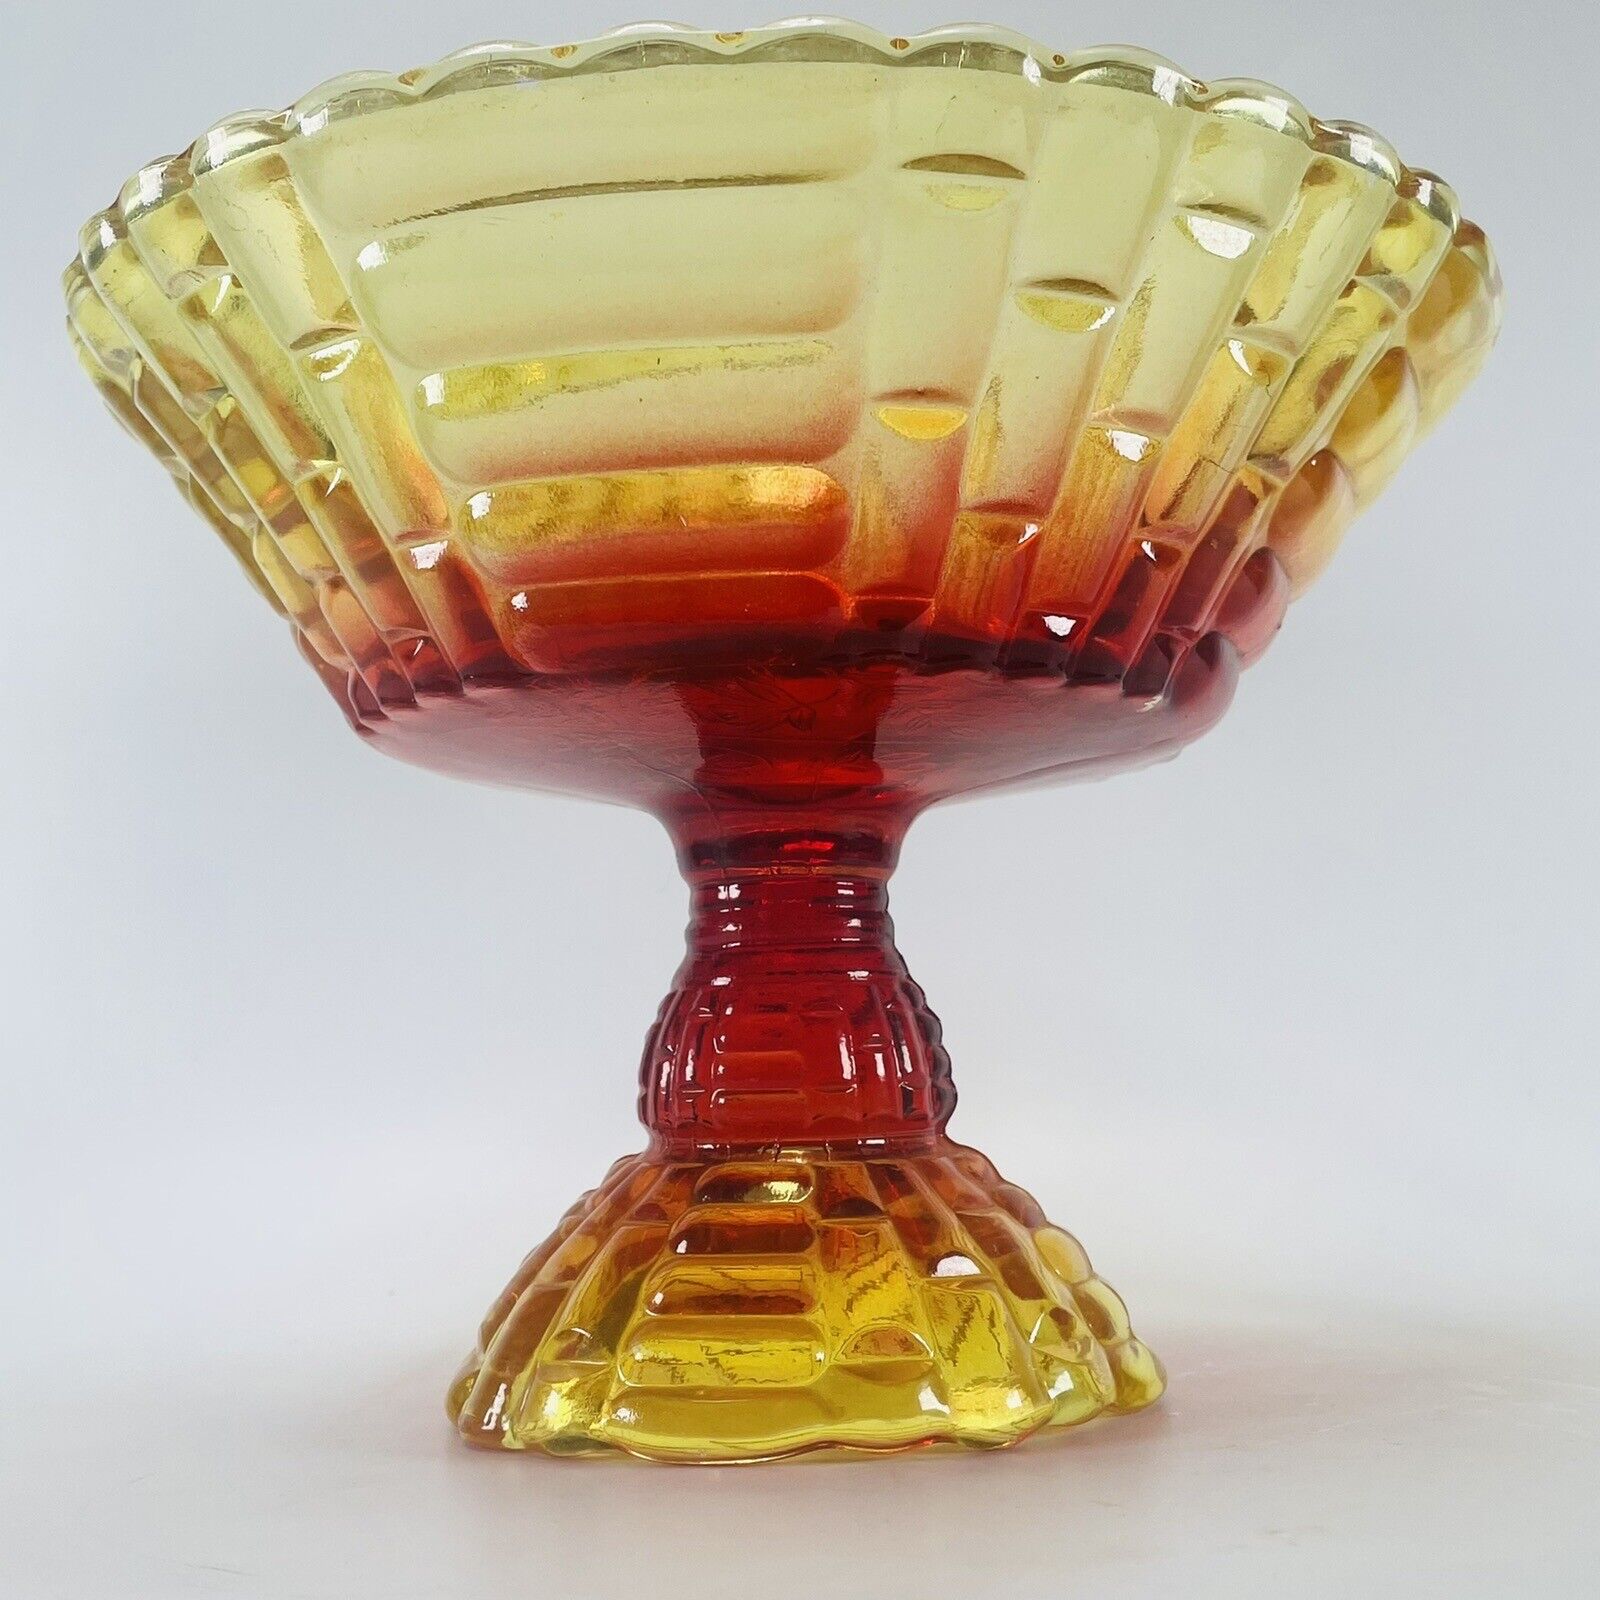 Jeannette Glass Amberina Louisa Footed Fruit Bowl Compote Yellow Red VTG Flashed